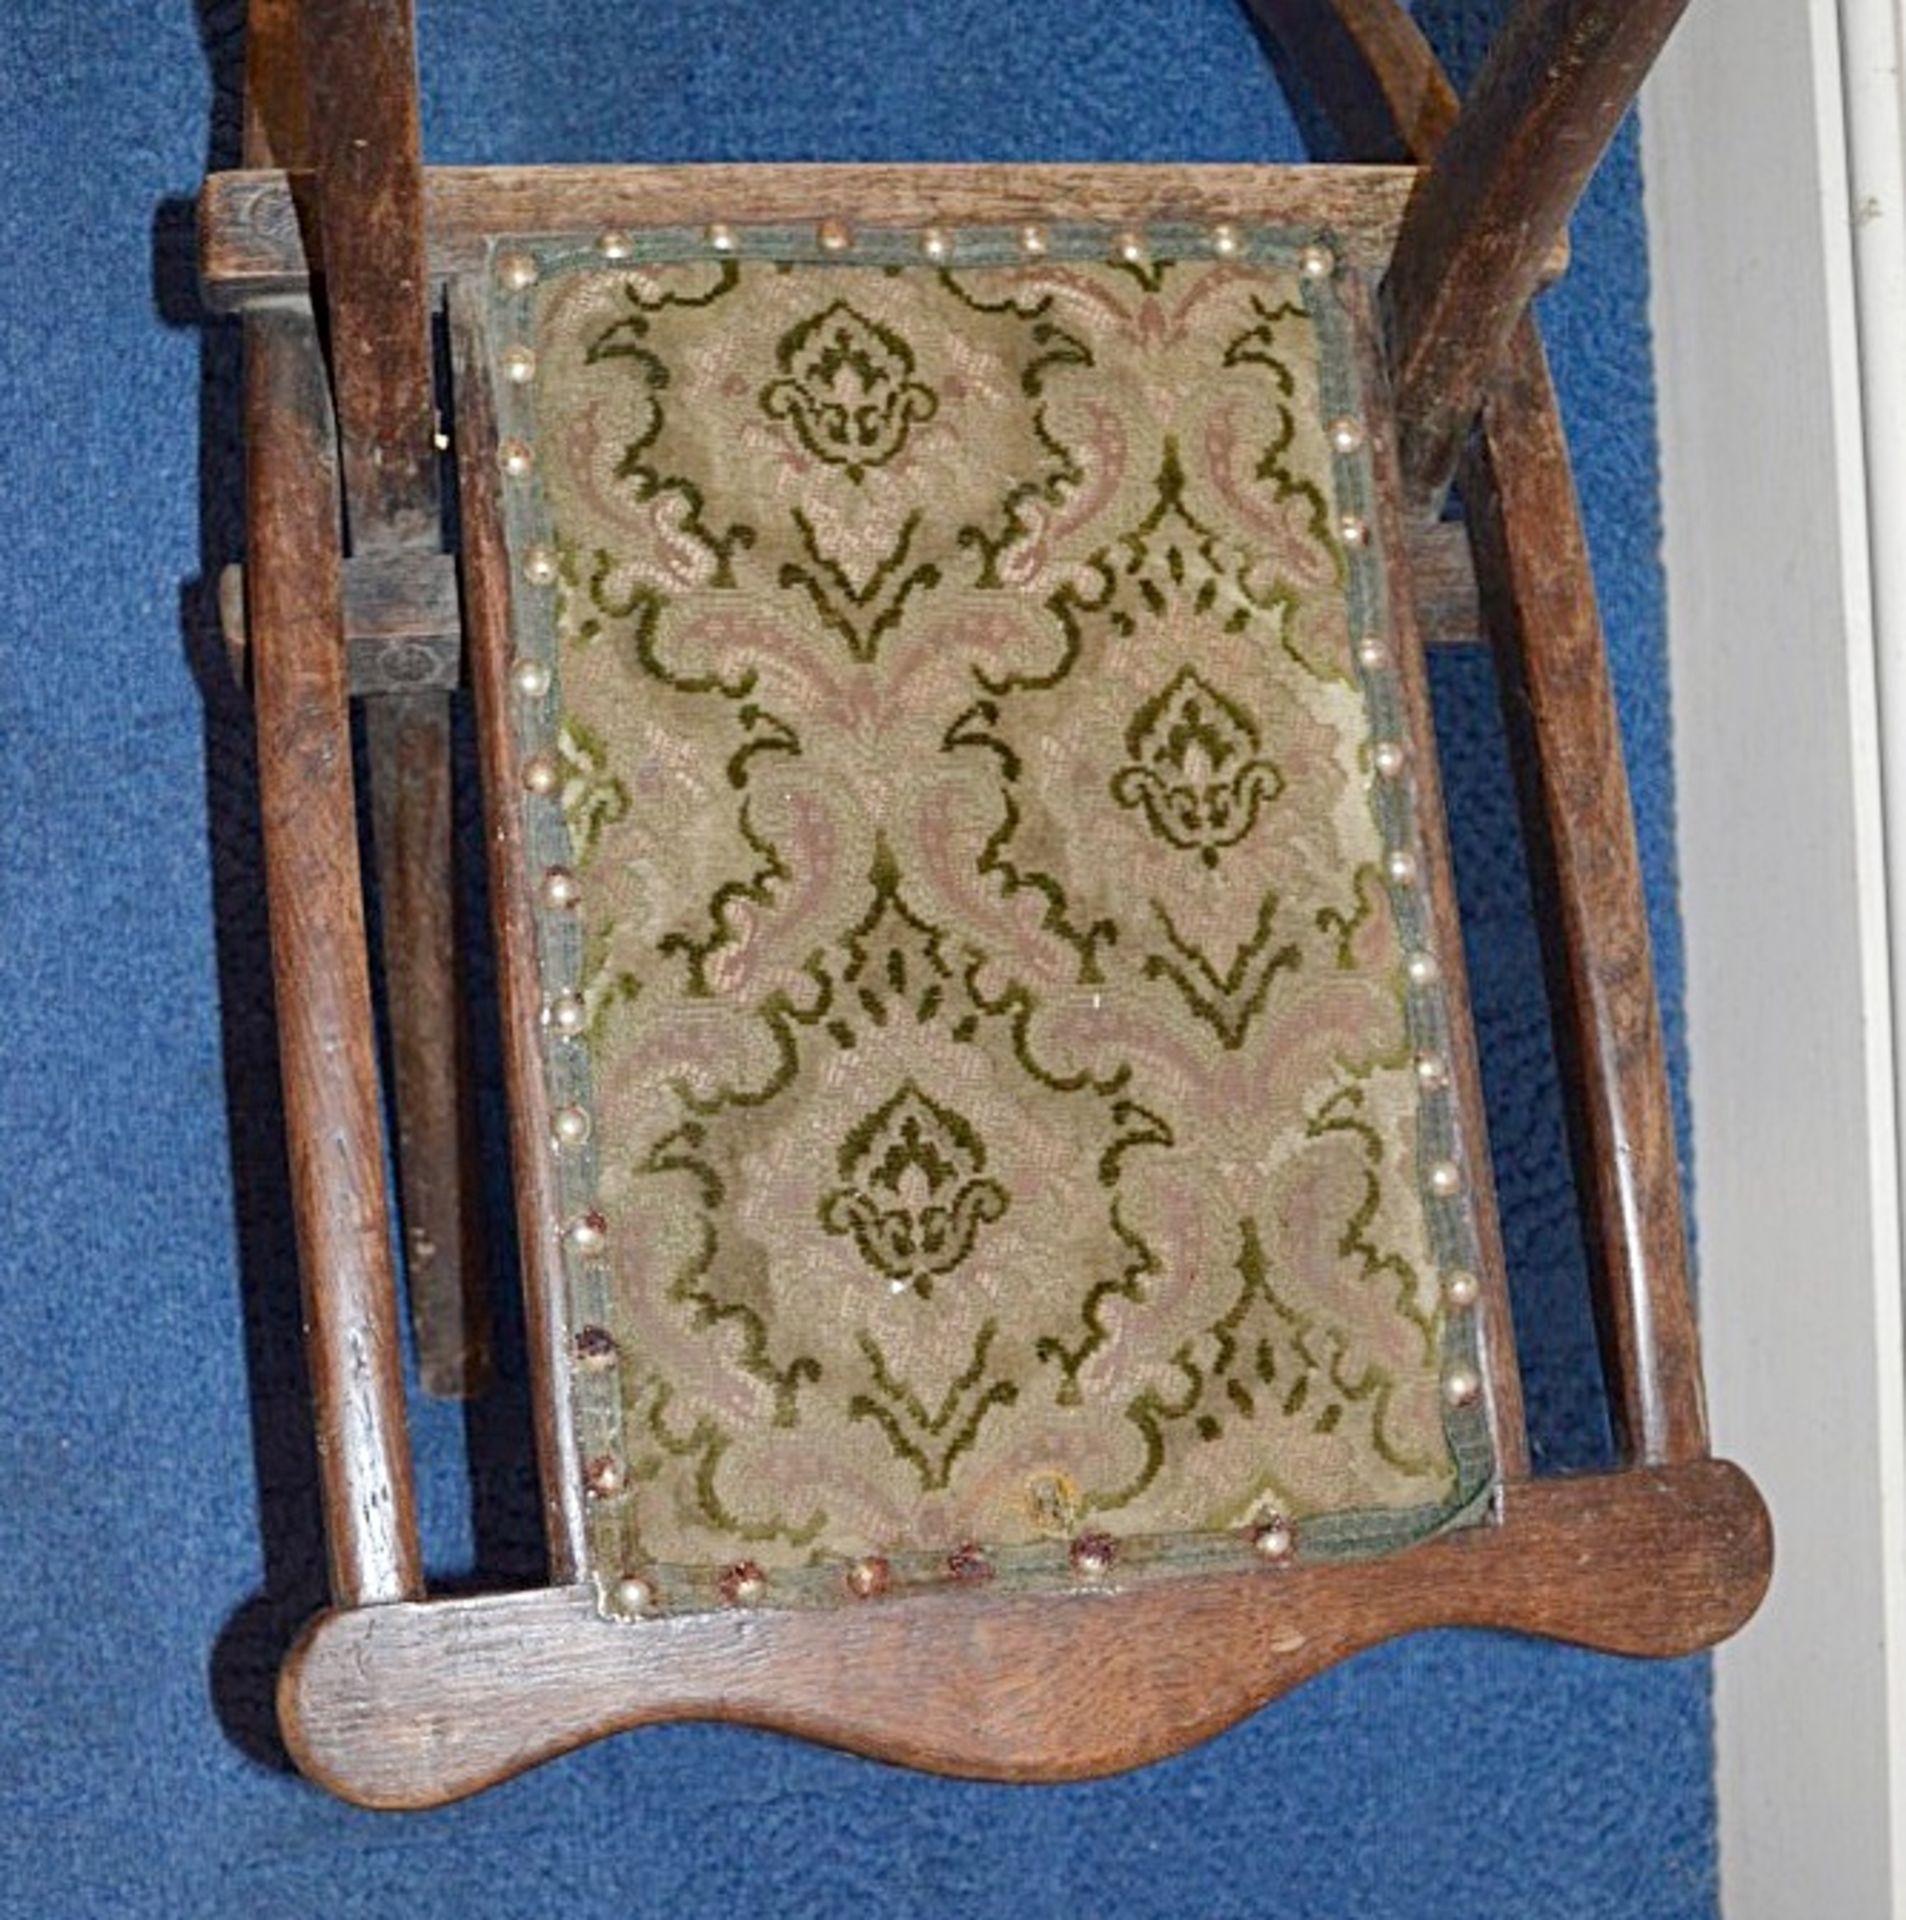 1 x Antique Victorian Upholstered Folding Chair - From A Grade II Listed Hall In Good Original - Image 7 of 7